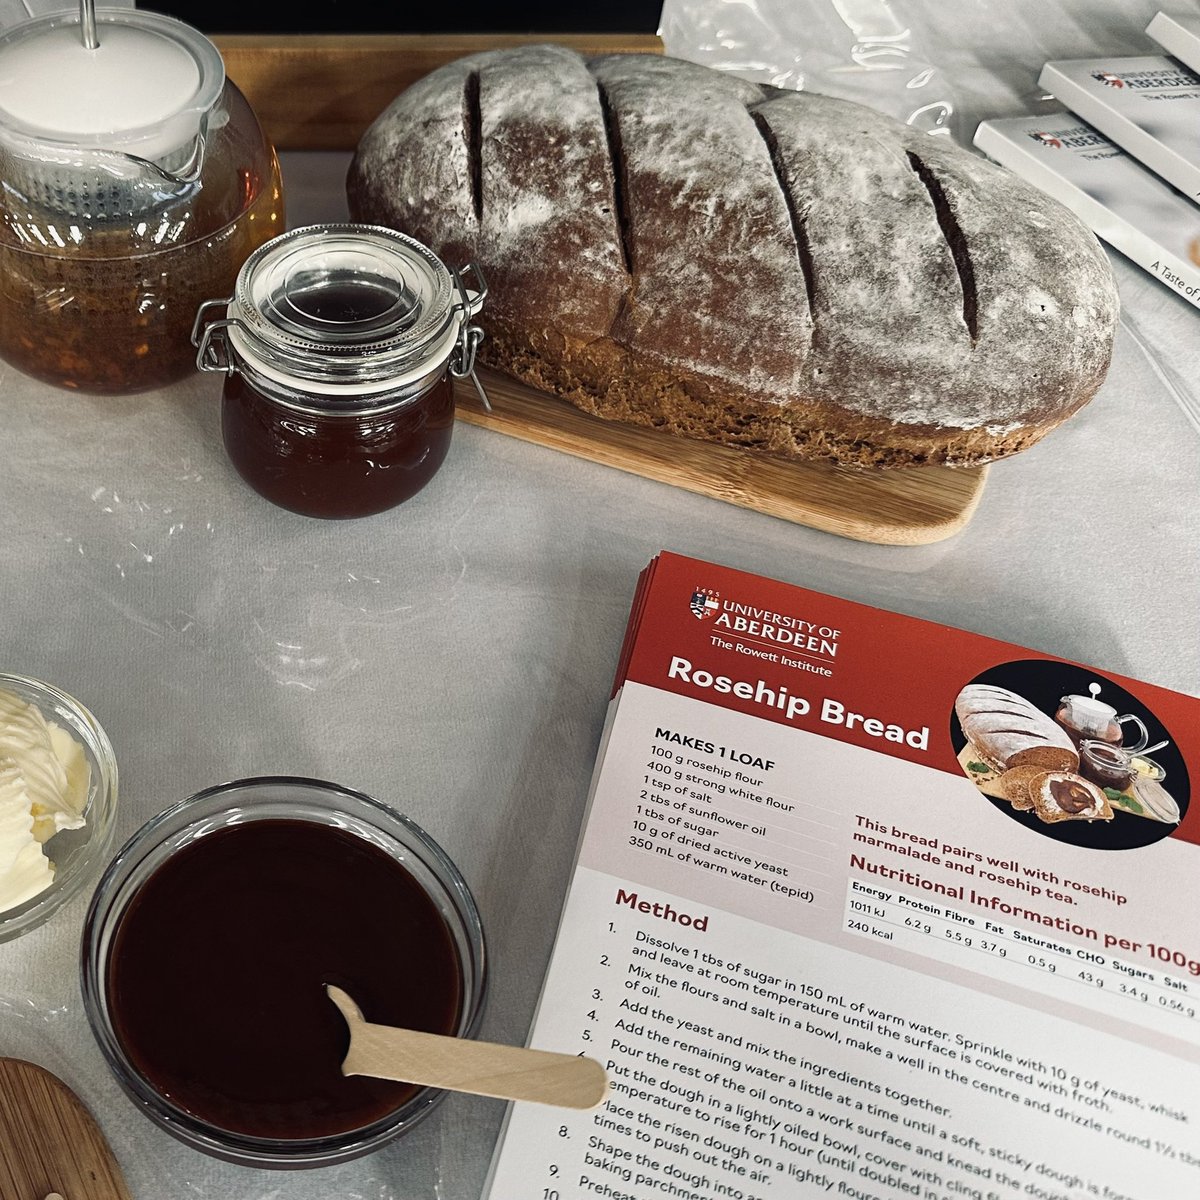 Celebrating our wild #ScottishLarder with rosehip (Rosa canina) bread at the Scottish Festival of Real Bread #LeadingIdeas @rowett_abdn - ‘to savour, devour, the blood-red treasure of faded flower’